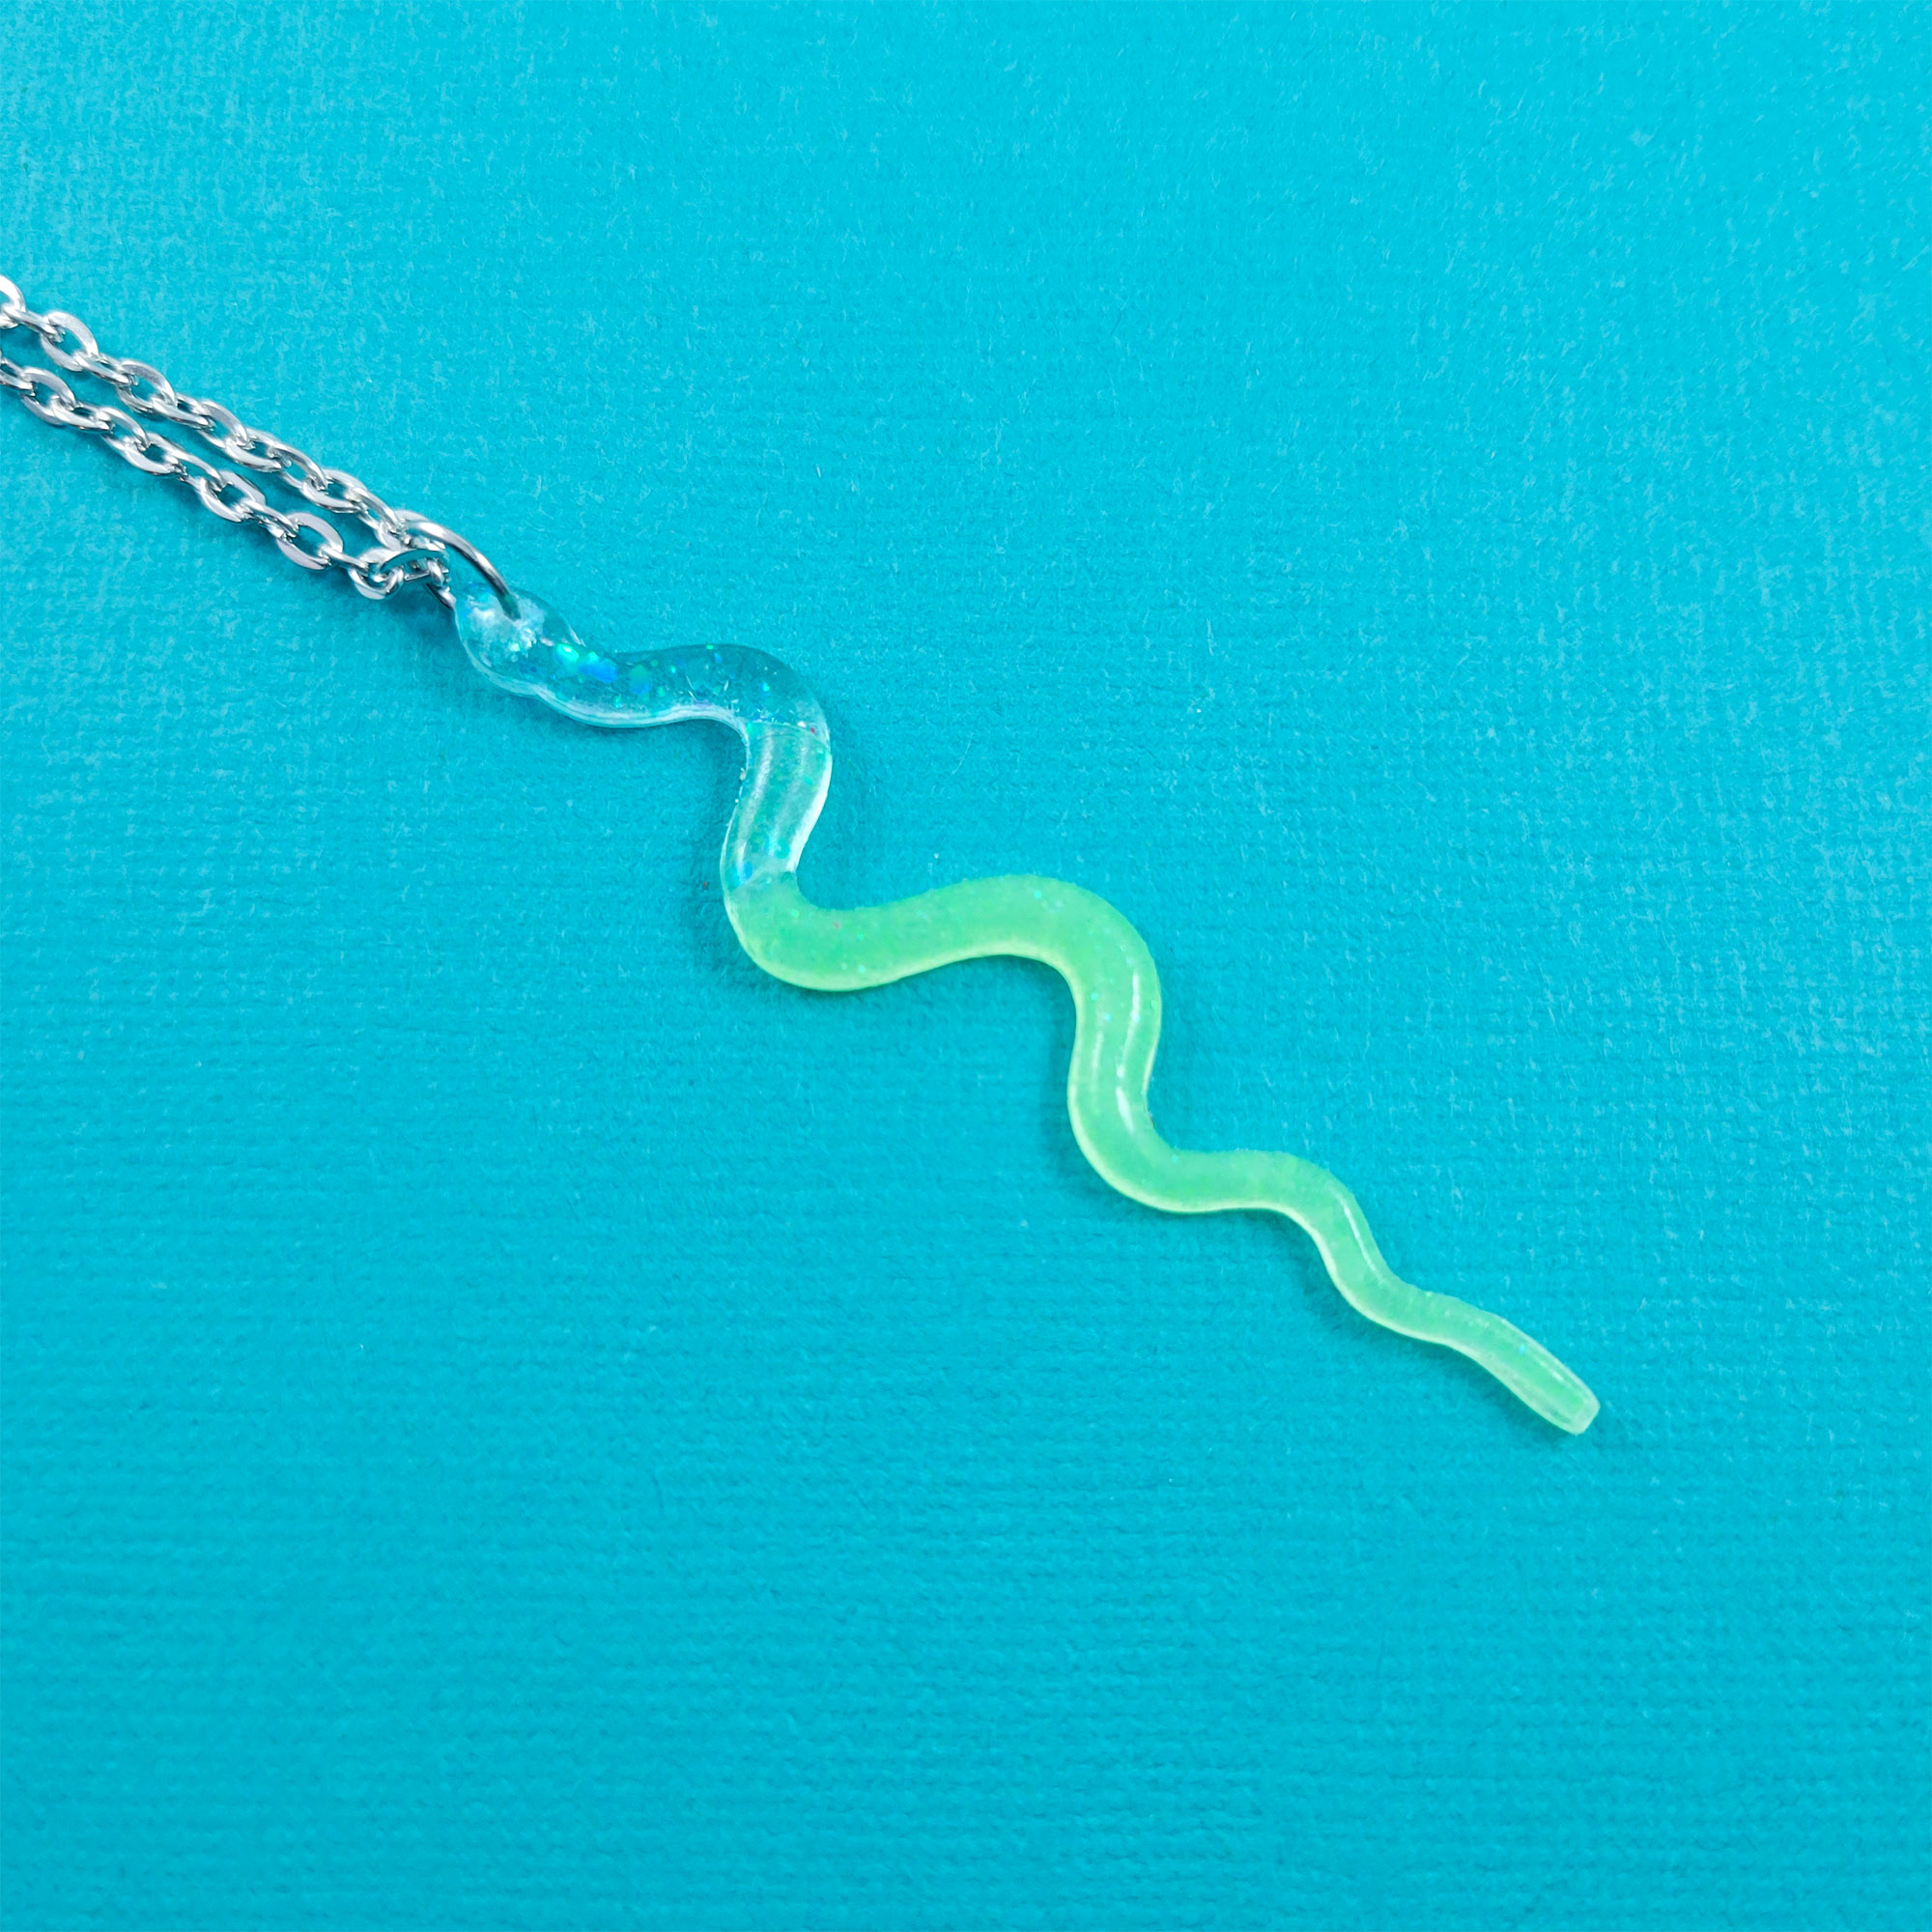 Slithering Snake Necklace by Wilde Designs